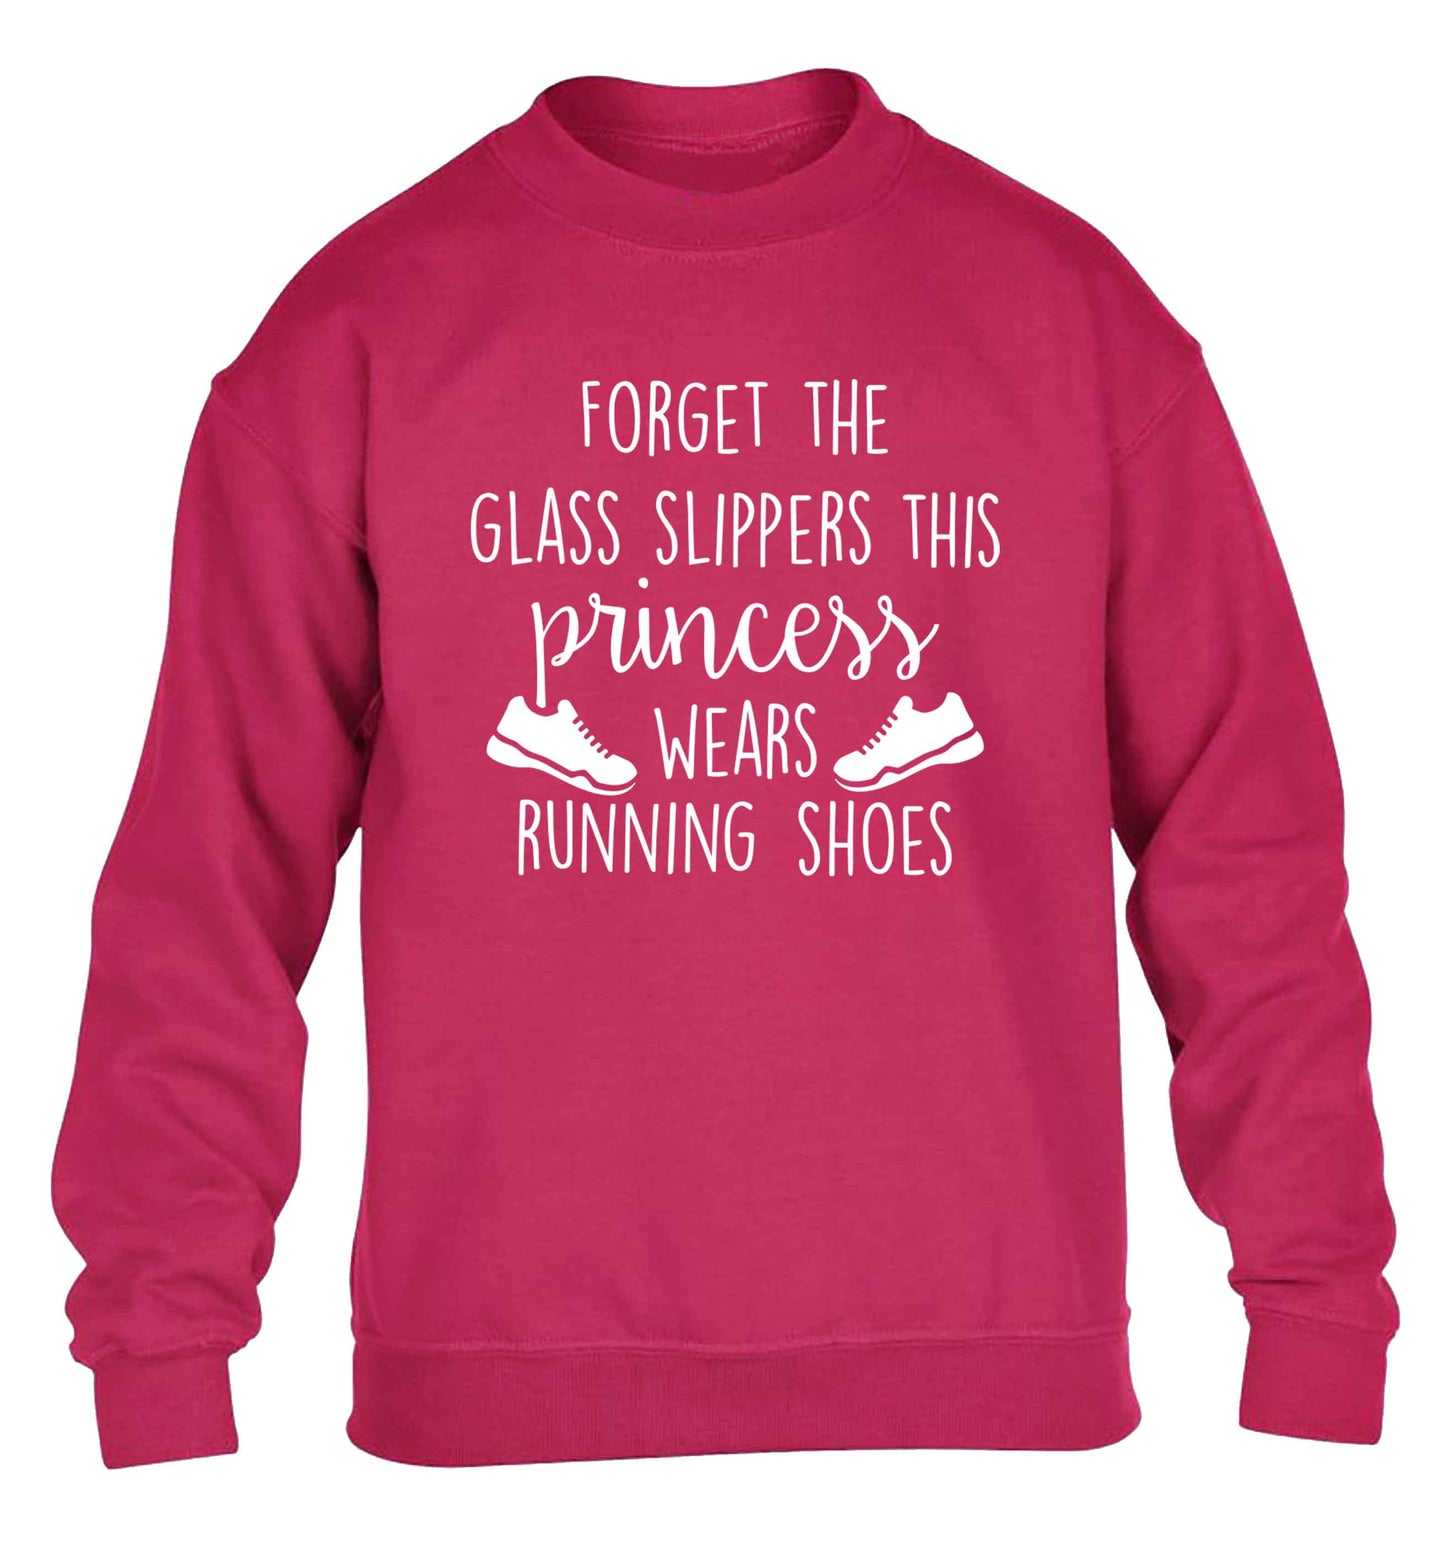 Forget the glass slippers this princess wears running shoes children's pink sweater 12-13 Years